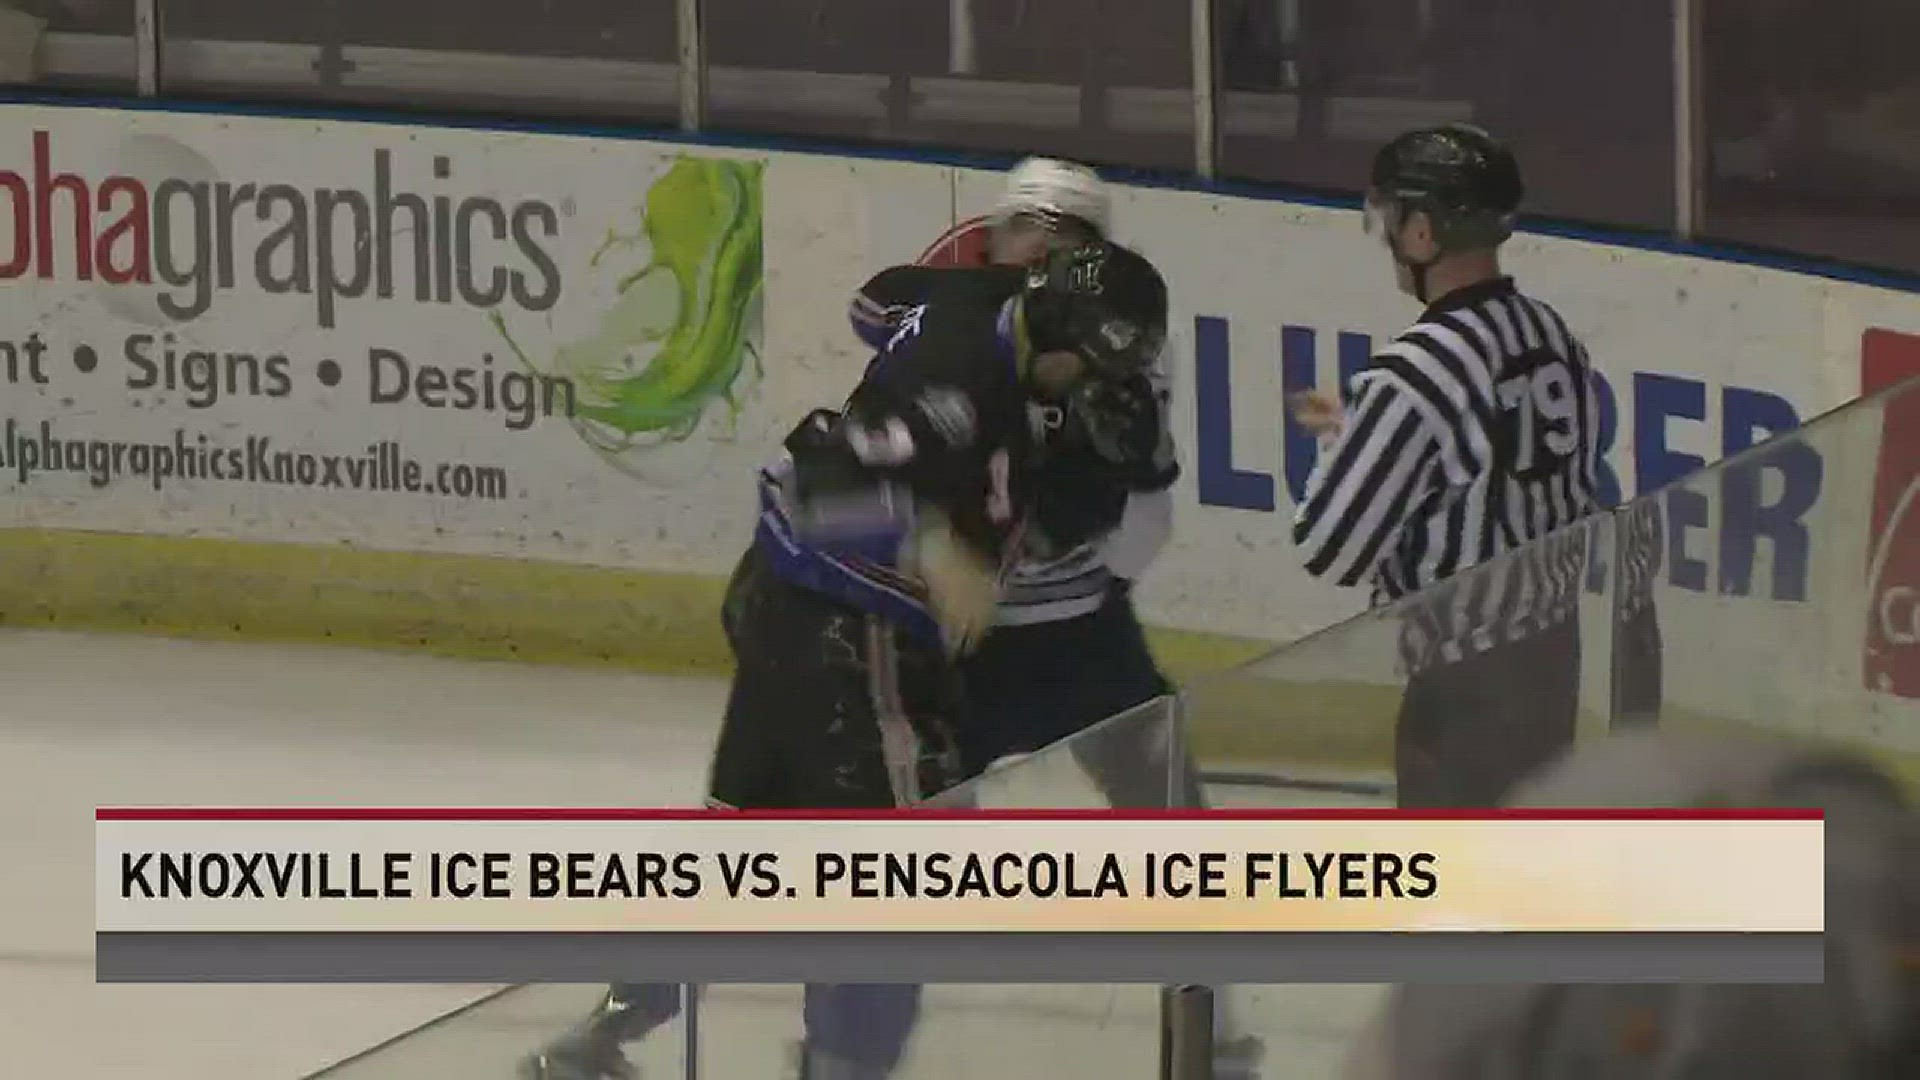 The Ice Bears head into the playoffs with a win over Pensacola. Knoxville will take on Peoria in the first round of the SPHL postseason.